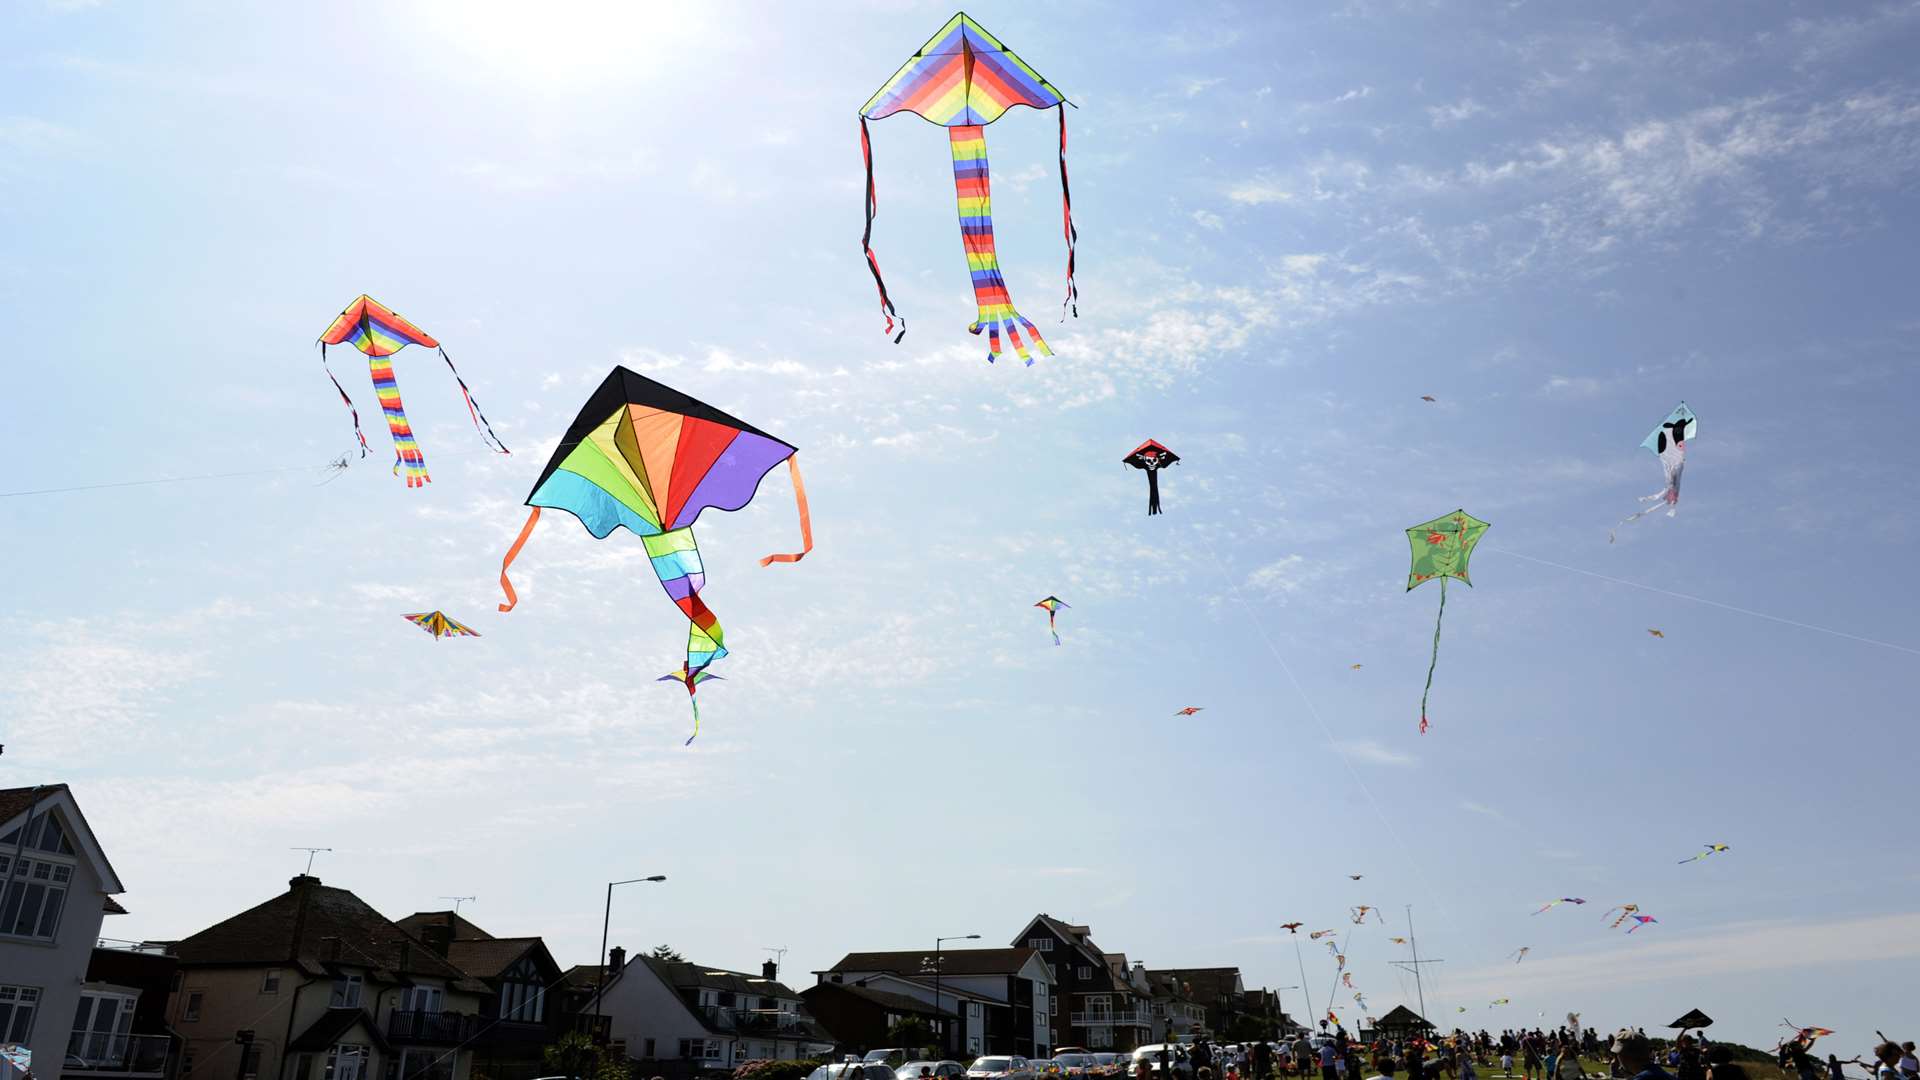 The kite flying competition on Tankerton Slopes